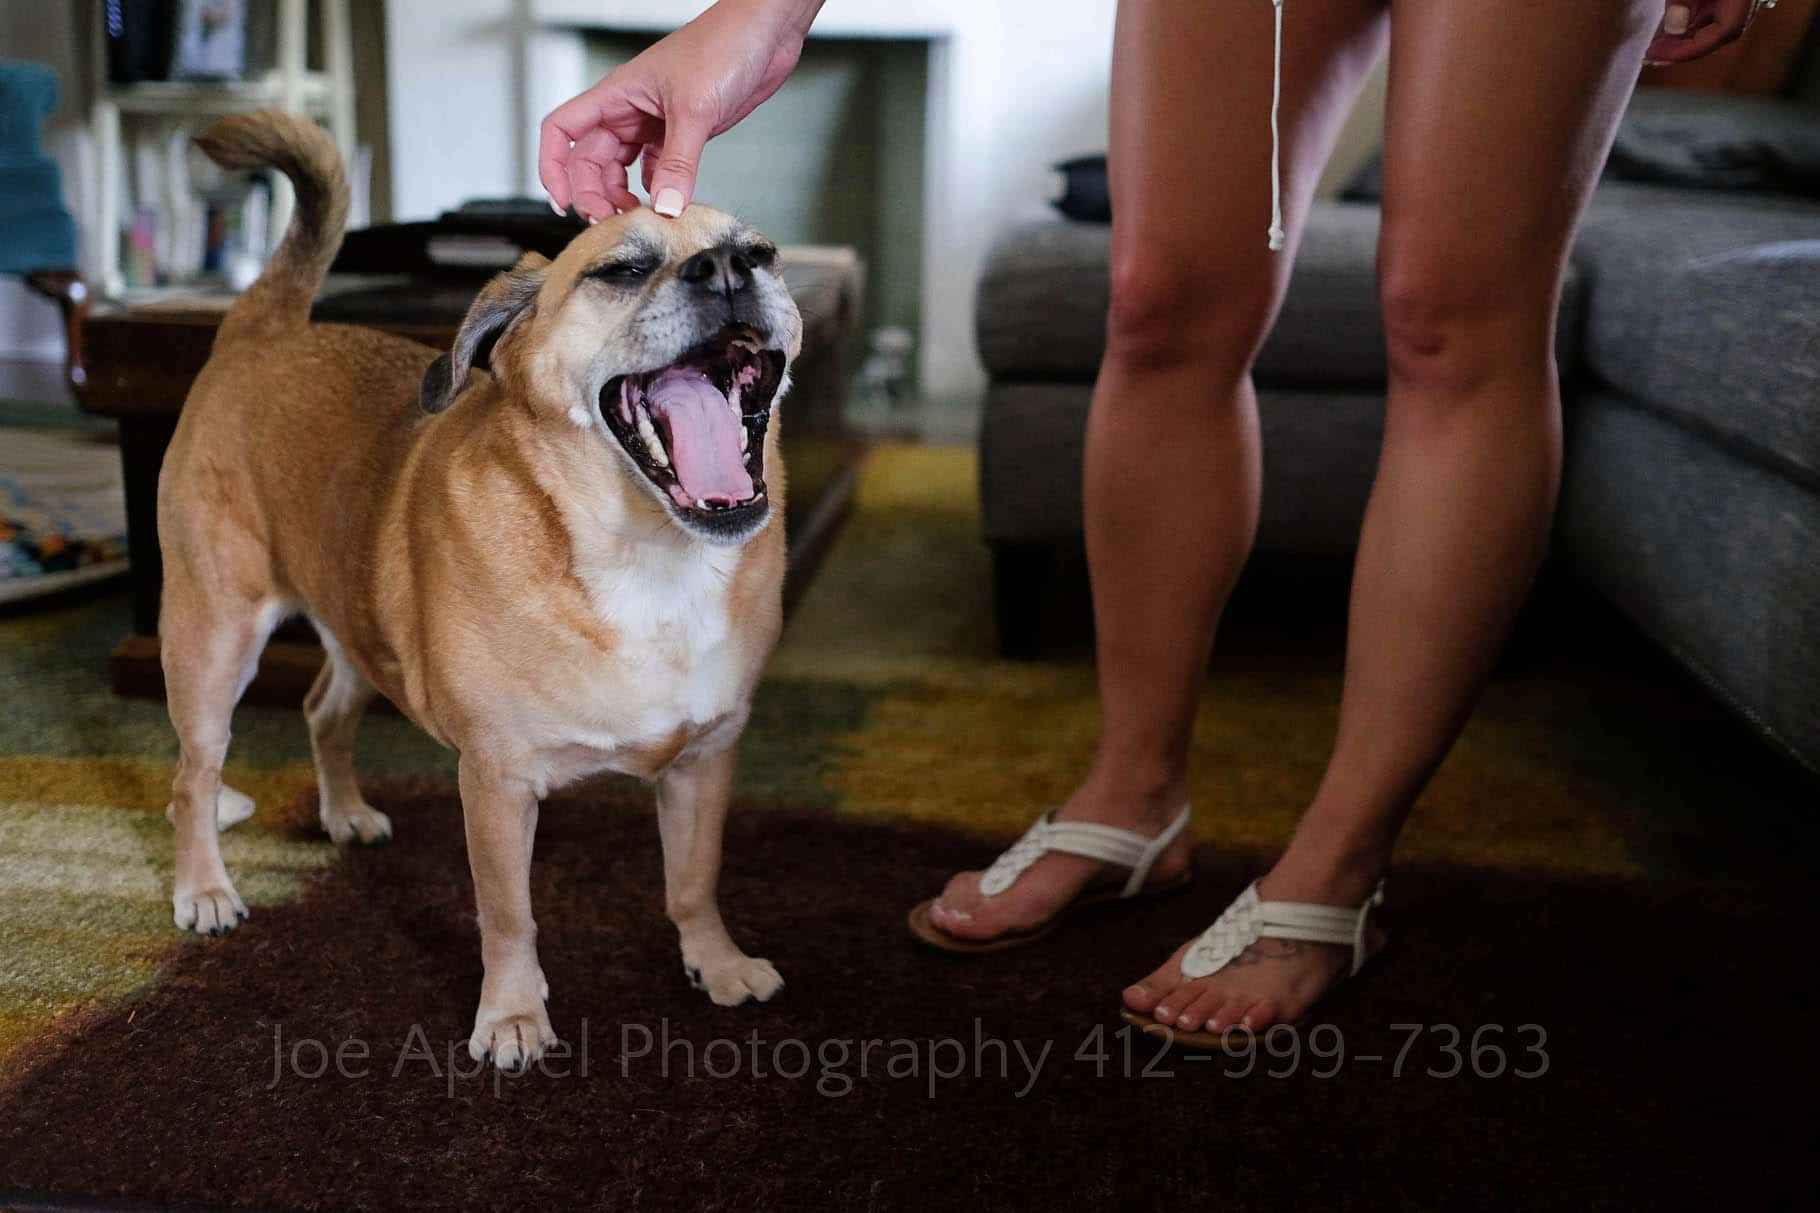 A woman wearing shorts and sandals reaches down and scratches the head of her dog who opens his mouth in a large yawn.